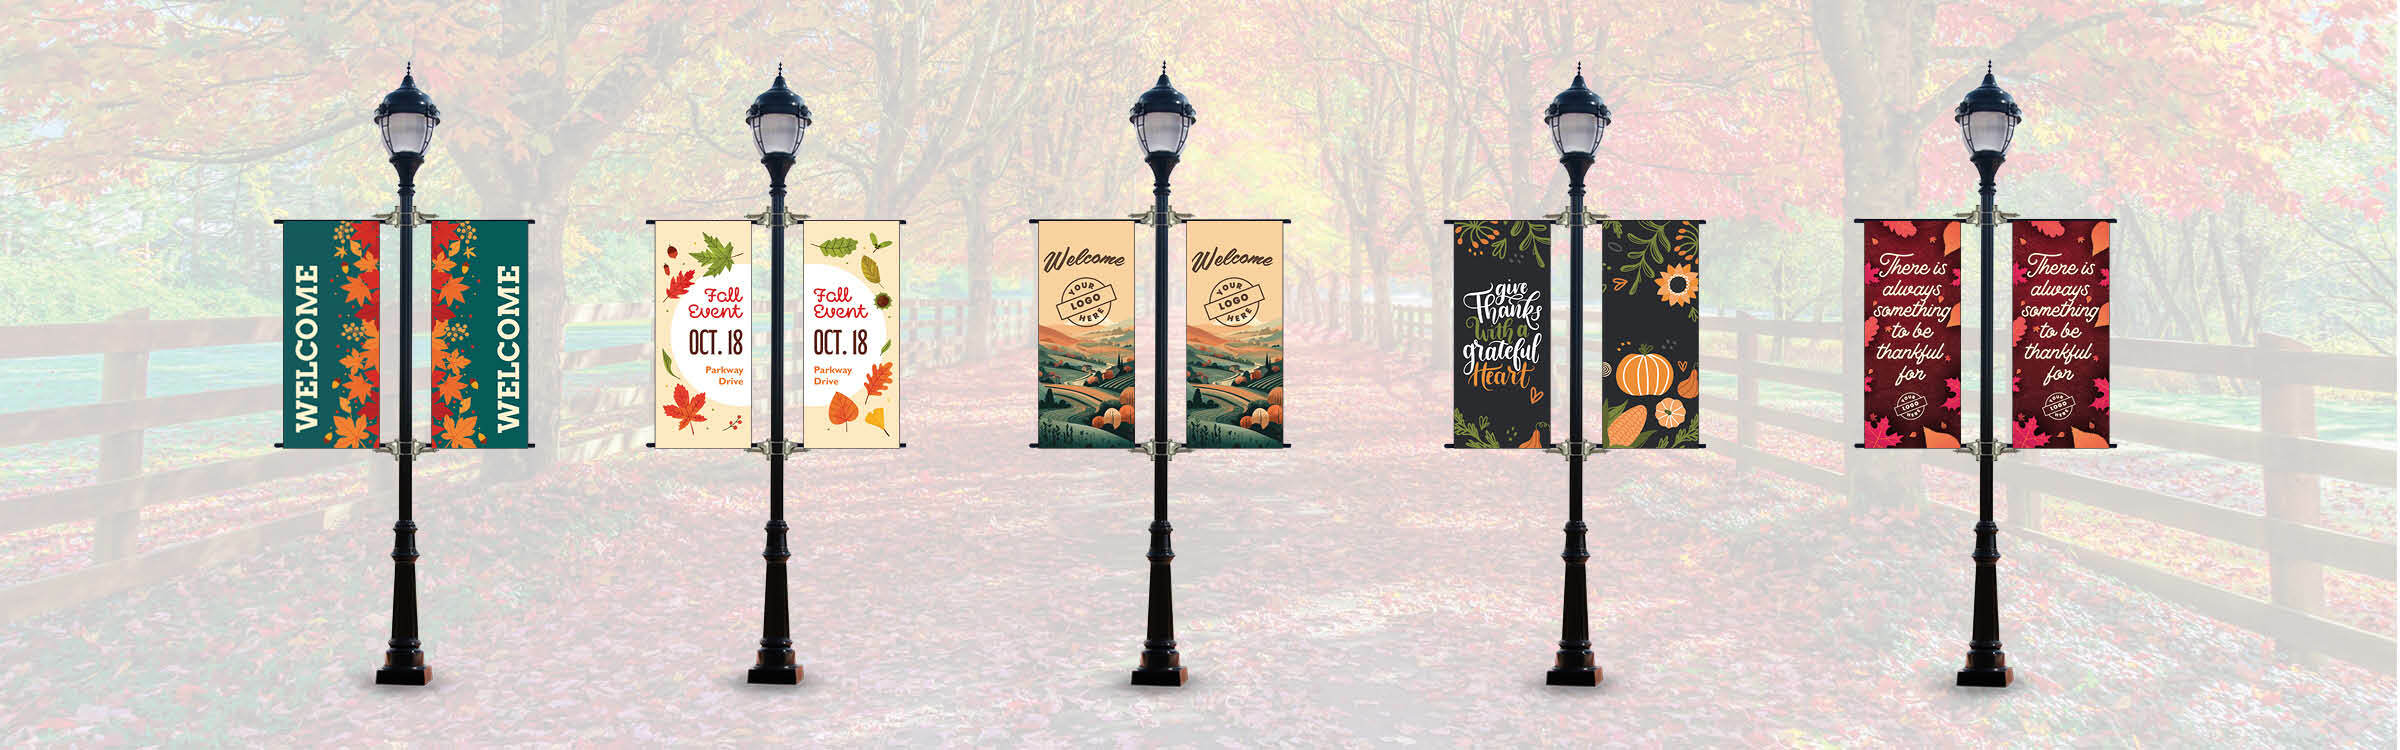 Banner Design Examples | Light Pole Banners for the Fall Season